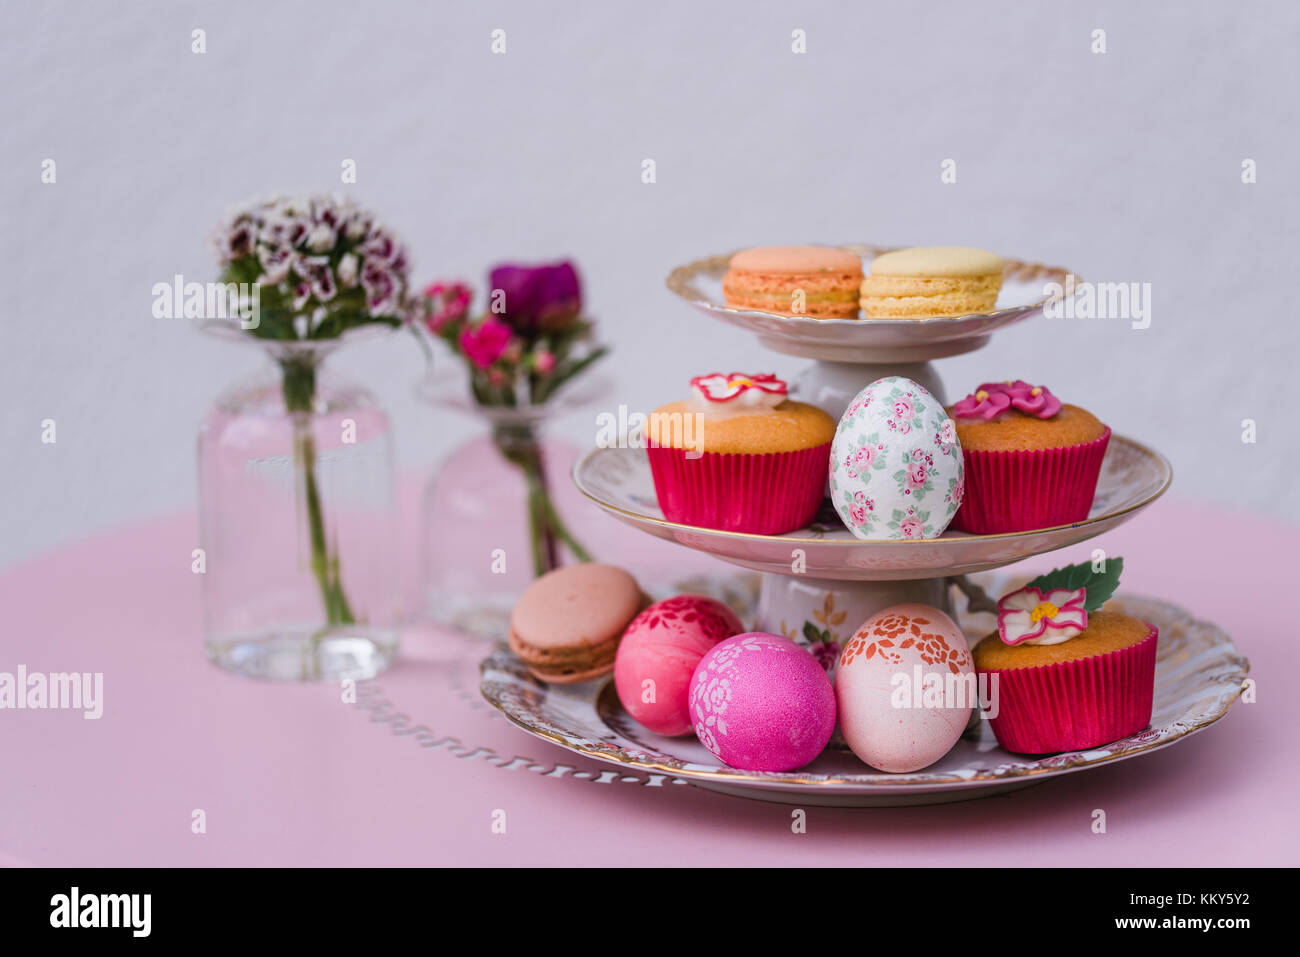 Etagere, muffin, Macarons, Easter eggs, flowers, Stock Photo